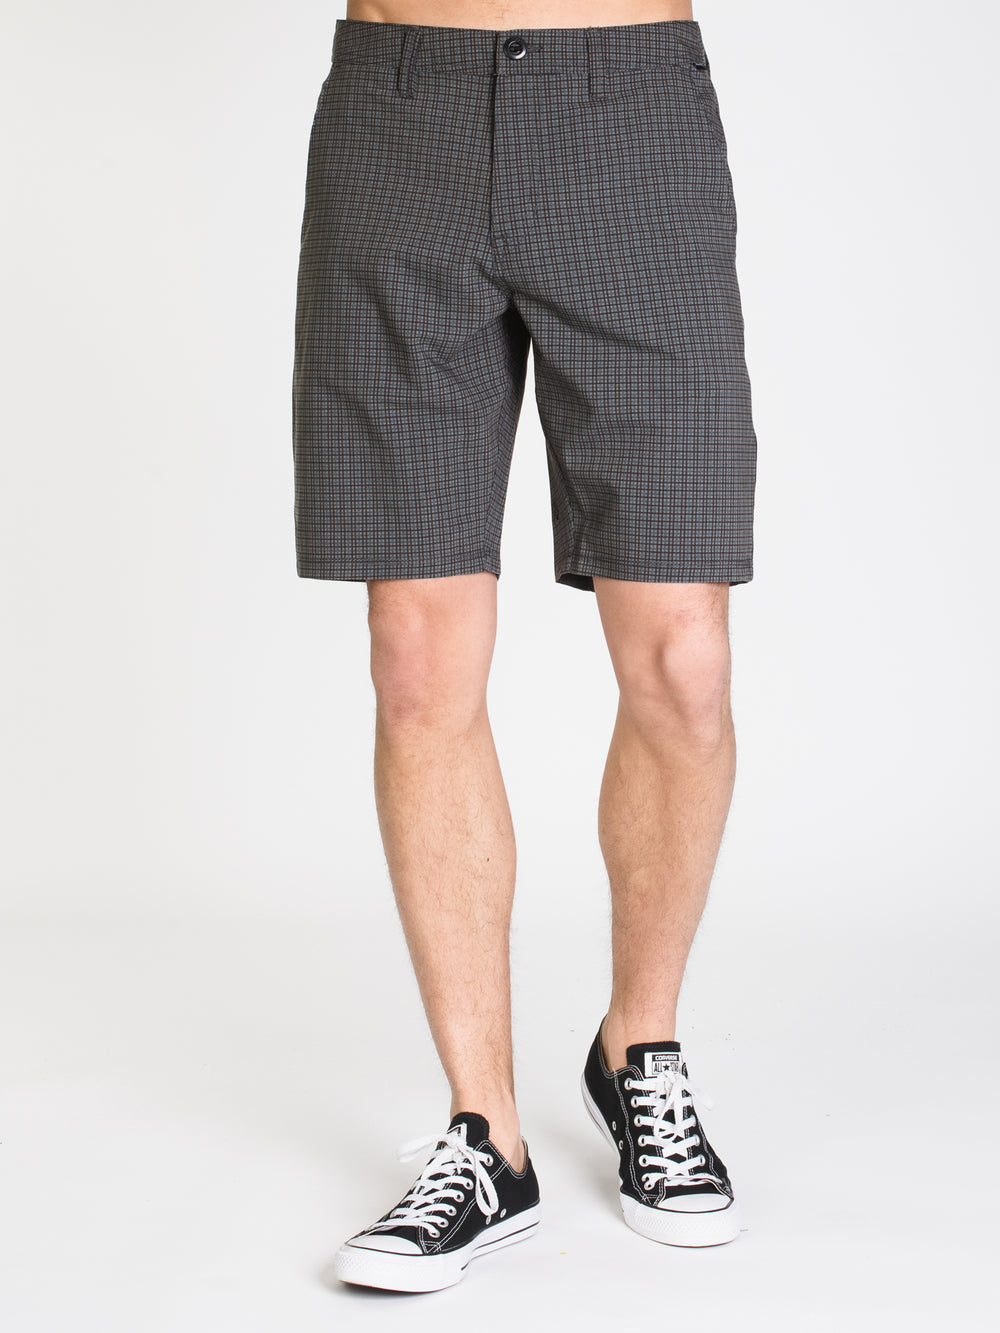 MENS FRICKIN SNT MIX 20' - CHARCOAL - CLEARANCE